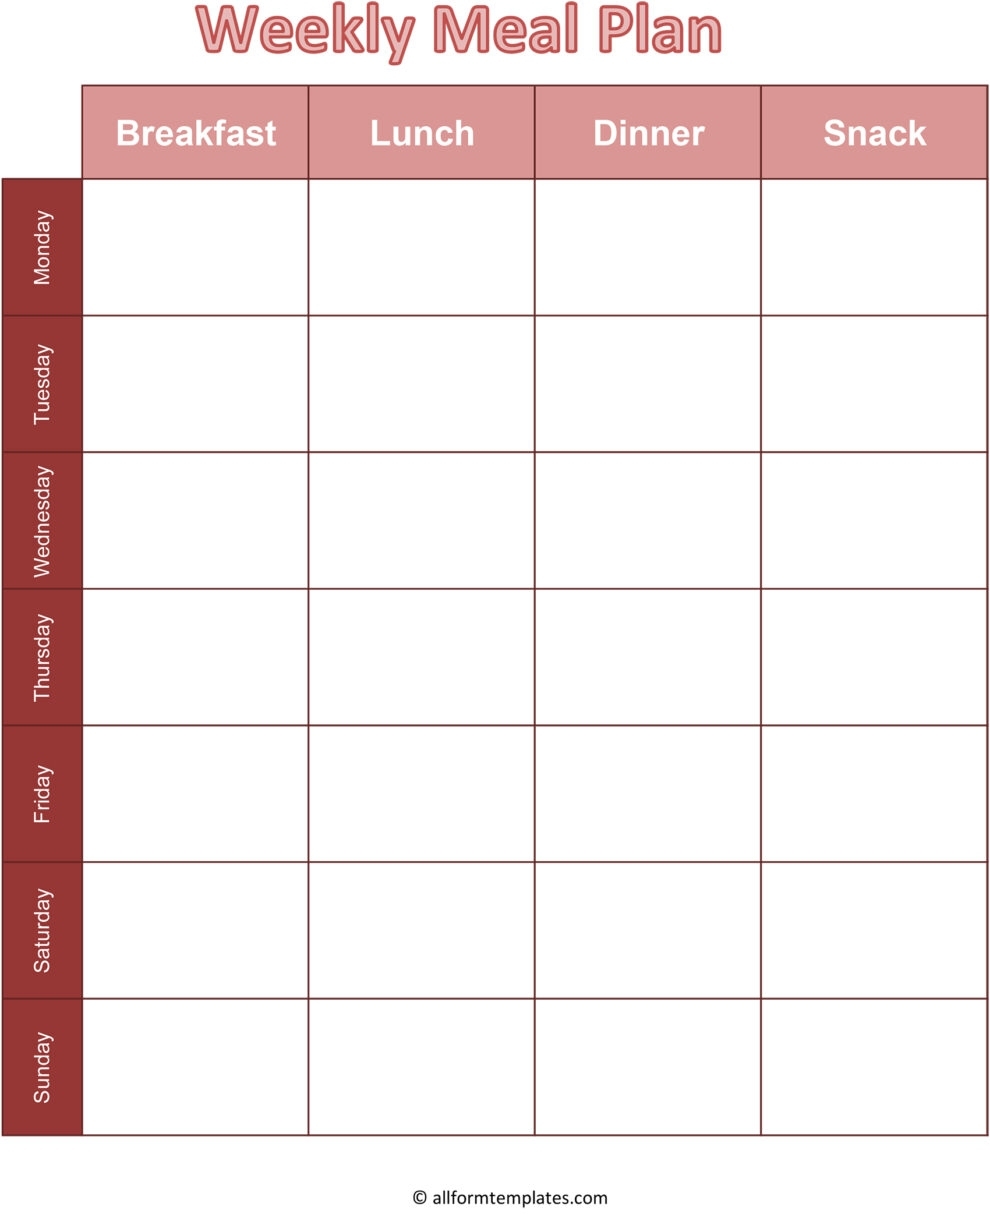 Blank Monthly Meal Planner Hd | All Form Templates Throughout Blank Meal Plan Template